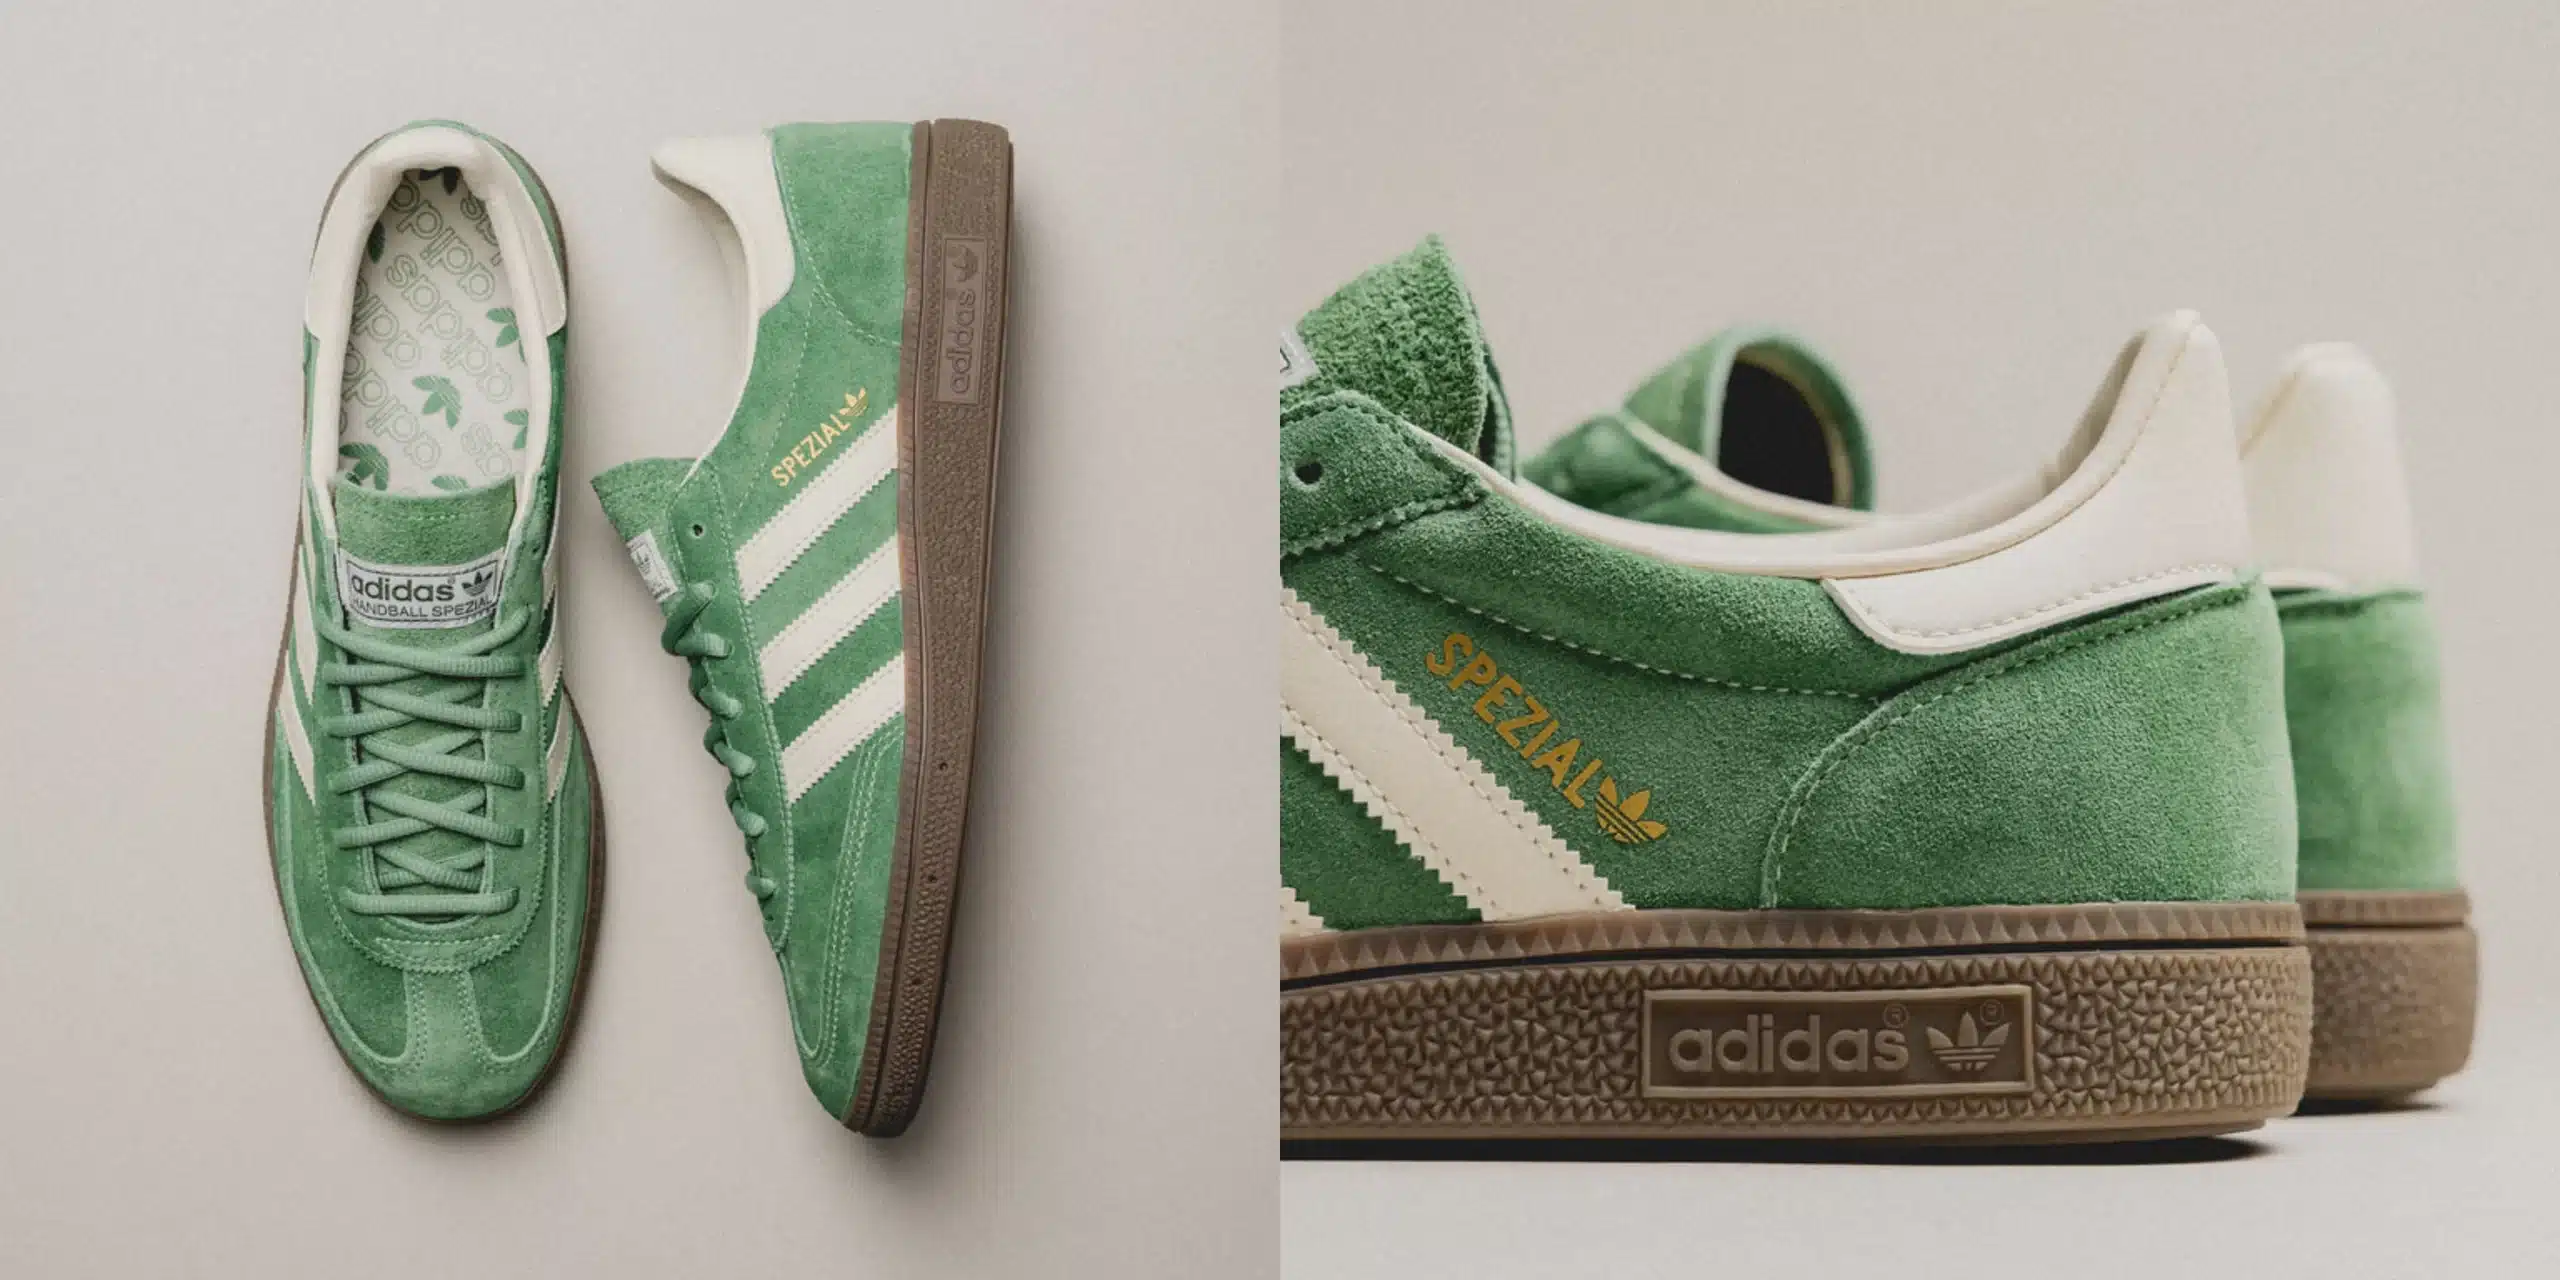 The Ultimate Guide to Adidas Handball Spezial (All Colorways + Links)